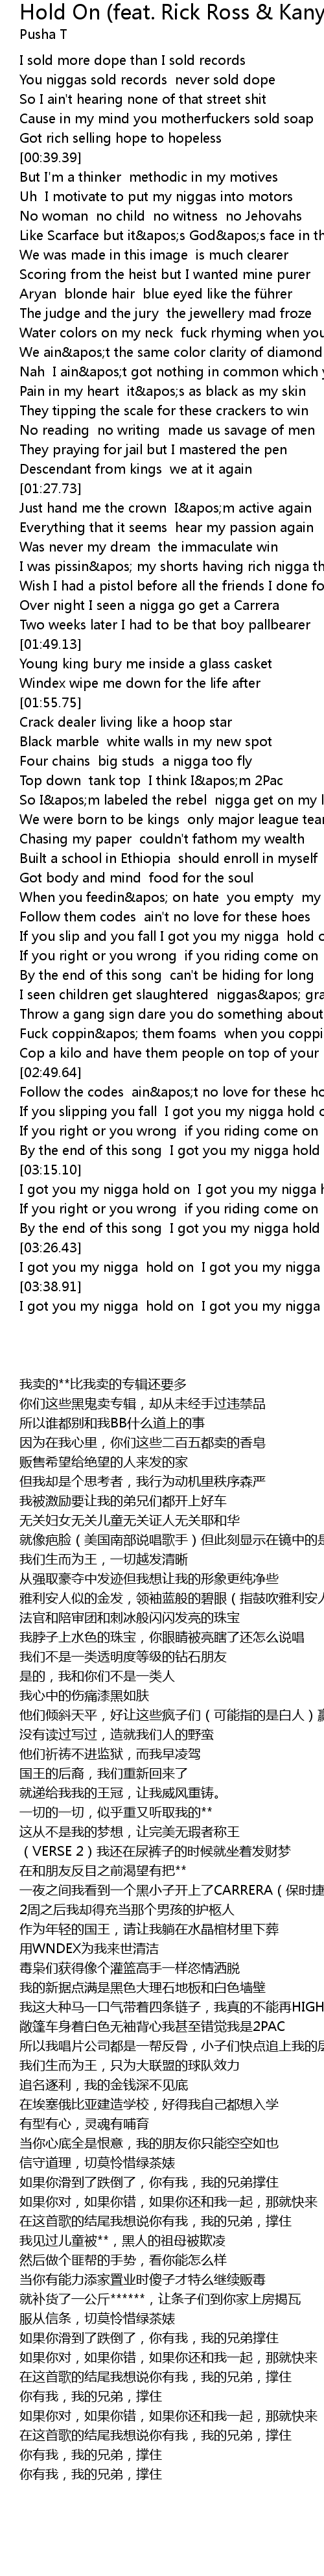 Hold On Feat Rick Ross Kanye West 歌词 歌词网